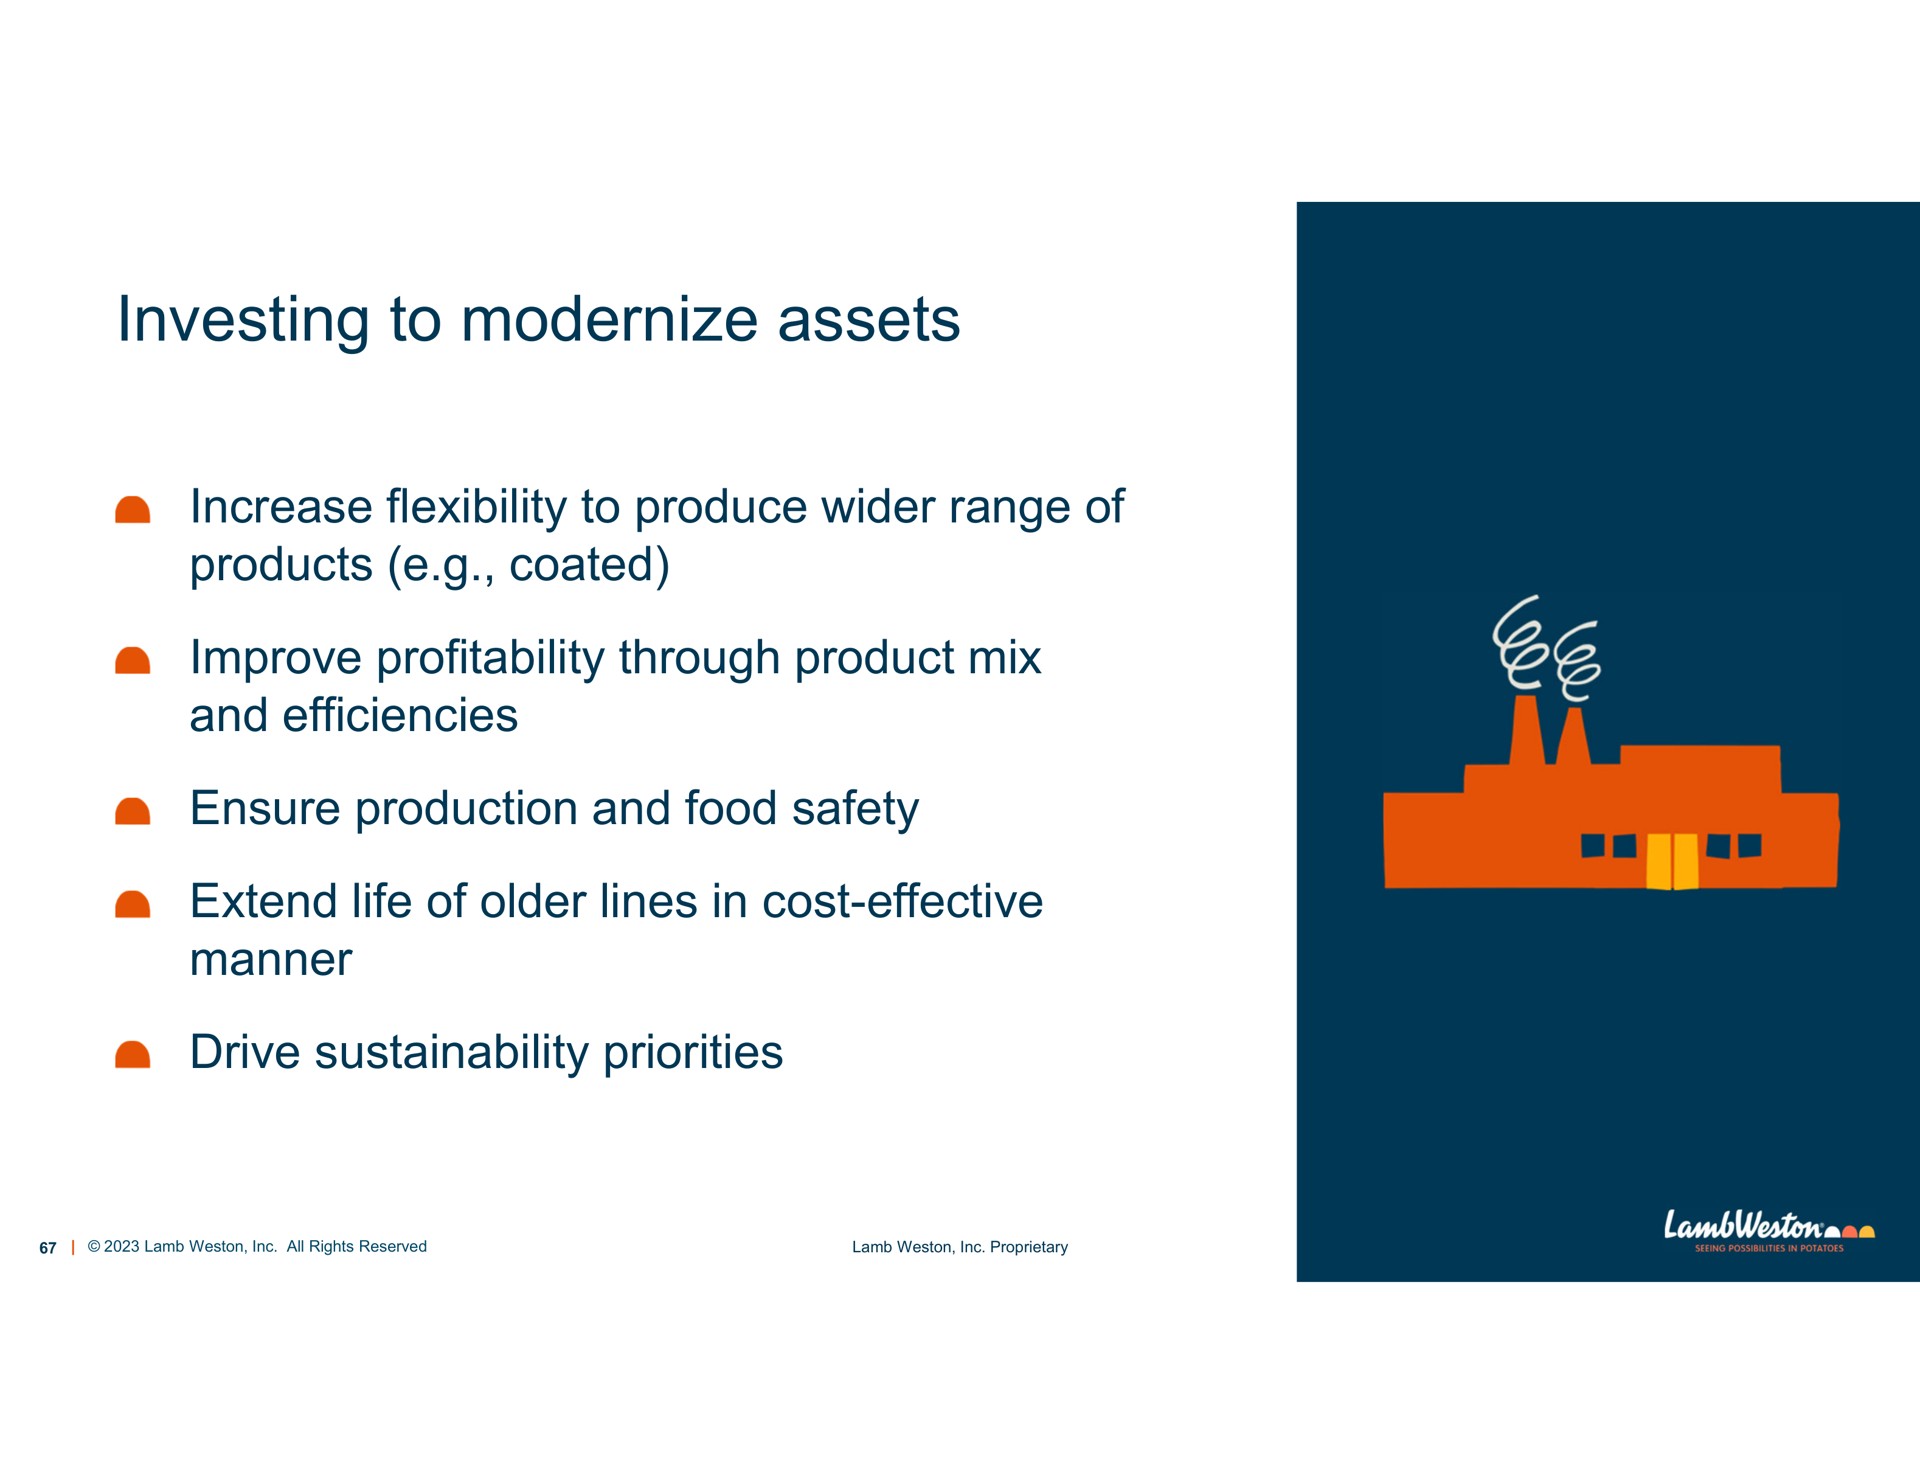 investing to modernize assets increase flexibility to produce range of products coated improve profitability through product mix and efficiencies ensure production and food safety extend life of older lines in cost effective manner drive priorities | Lamb Weston